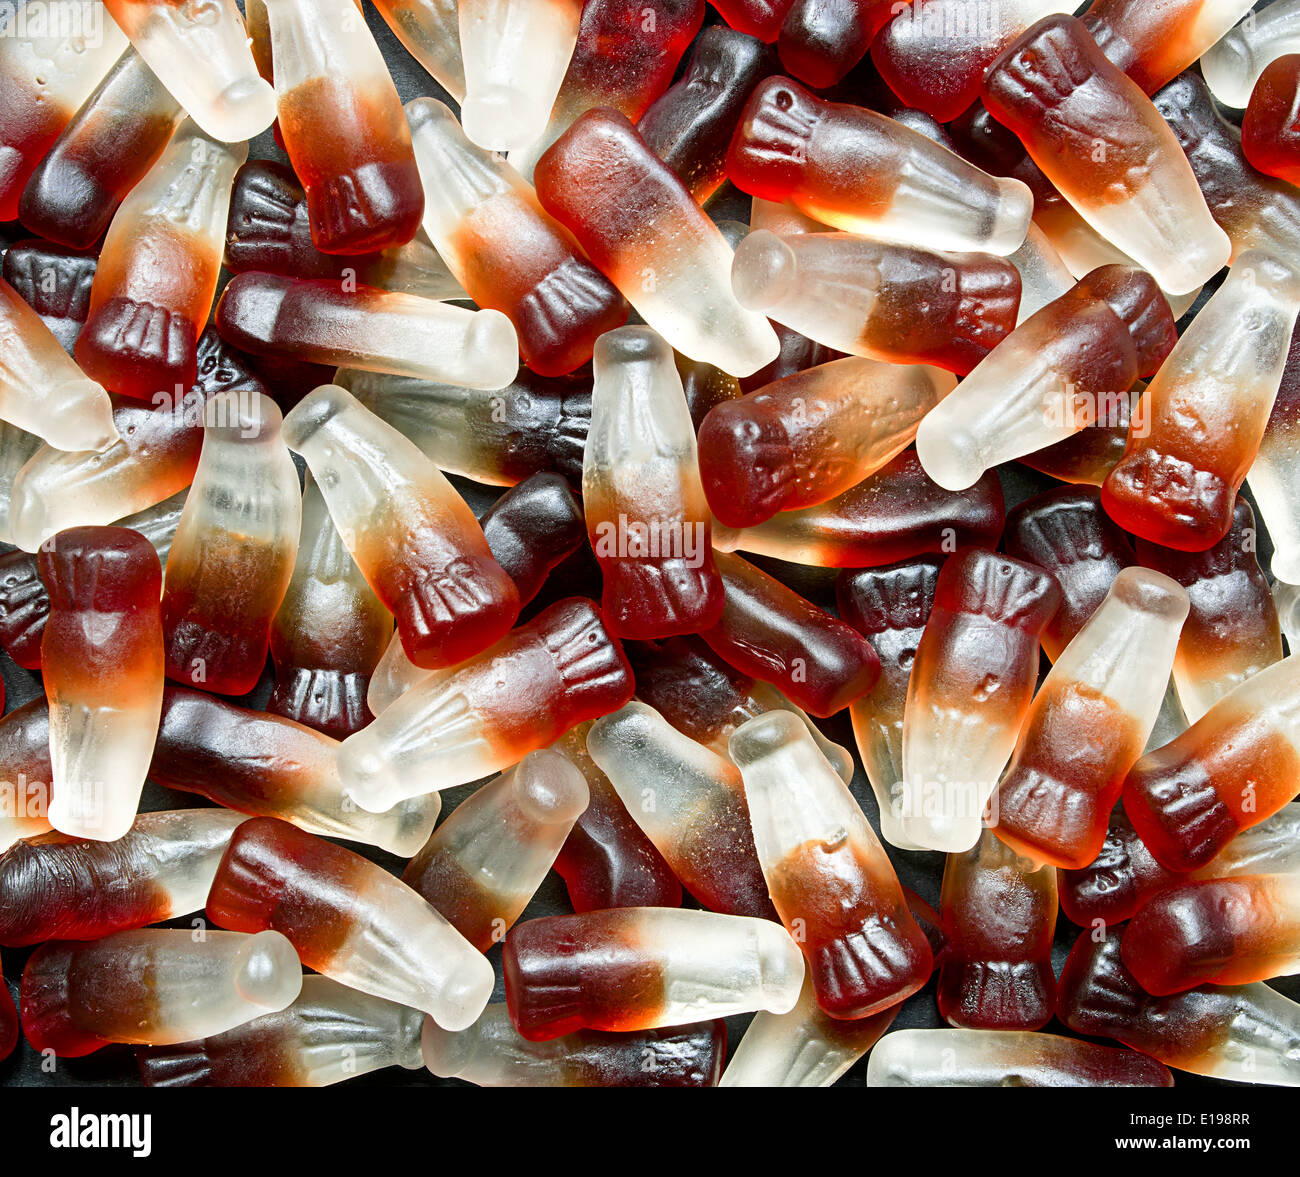 Chewy Cola Bottle background a popular retro sweet also known as Gummy candy at a pick and mix self service market. Stock Photo